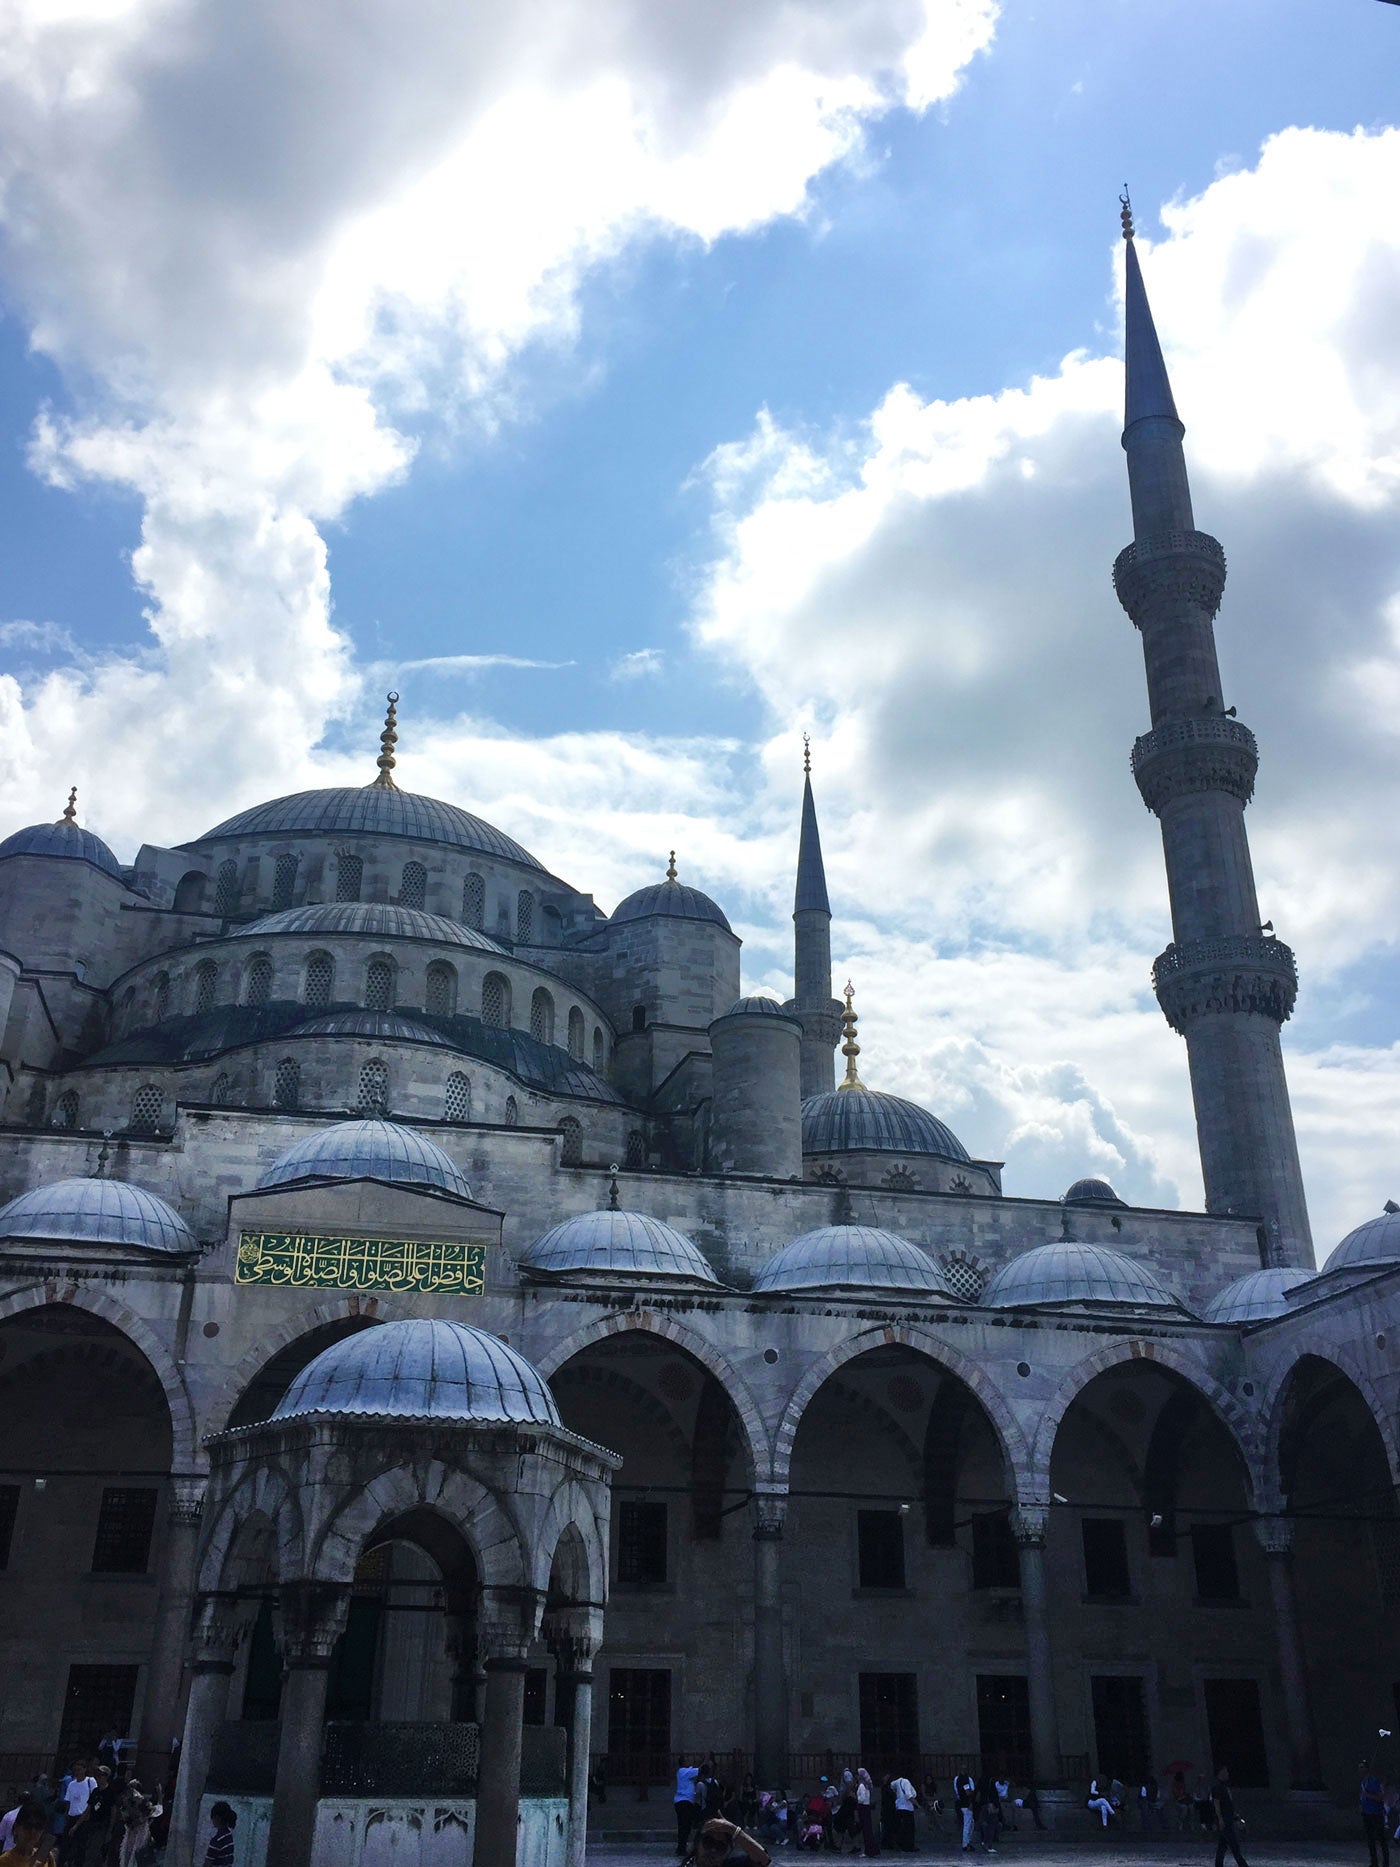 blue mosque in Istanbul